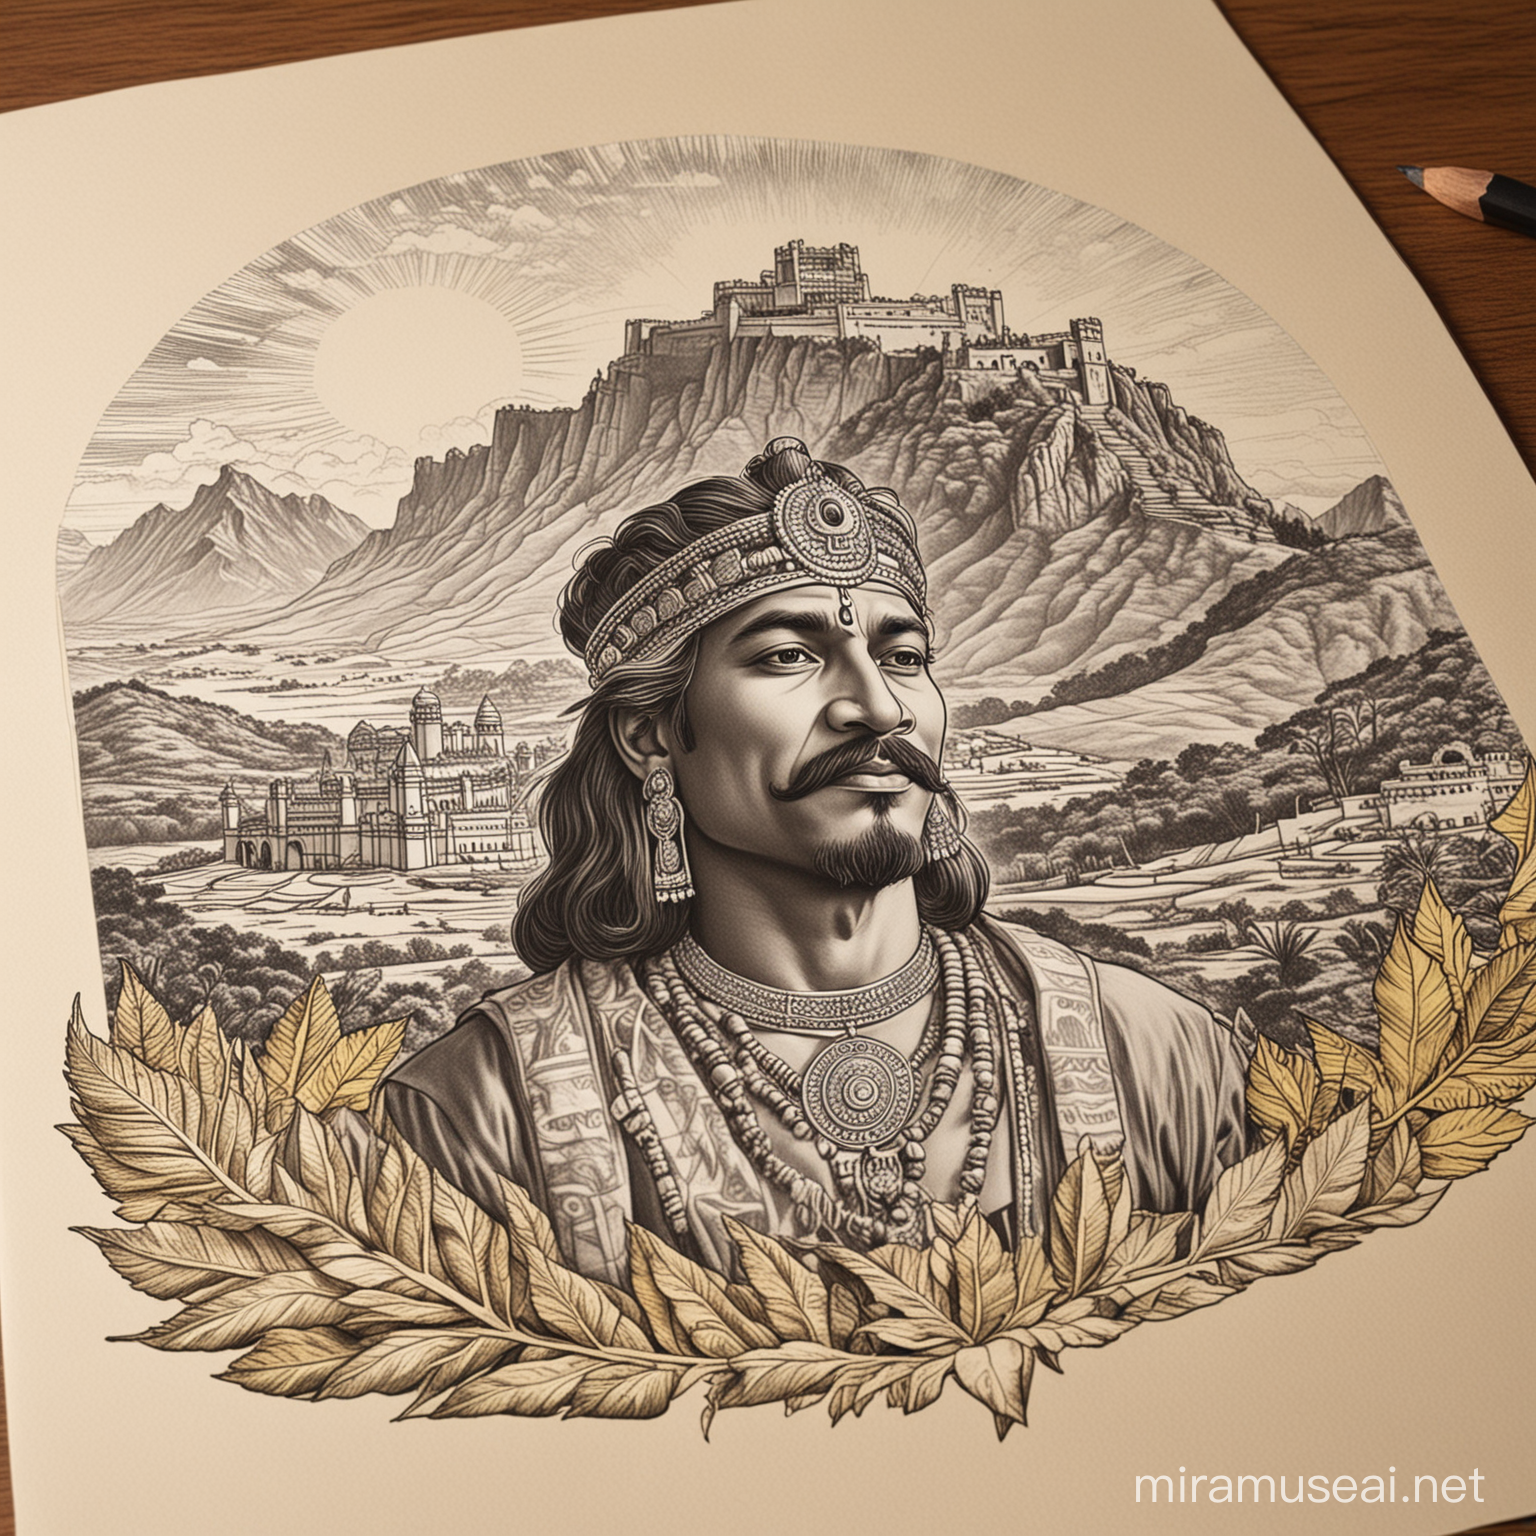 Majestic Indian King Surrounded by Castles and Mountains Coloring Sheet